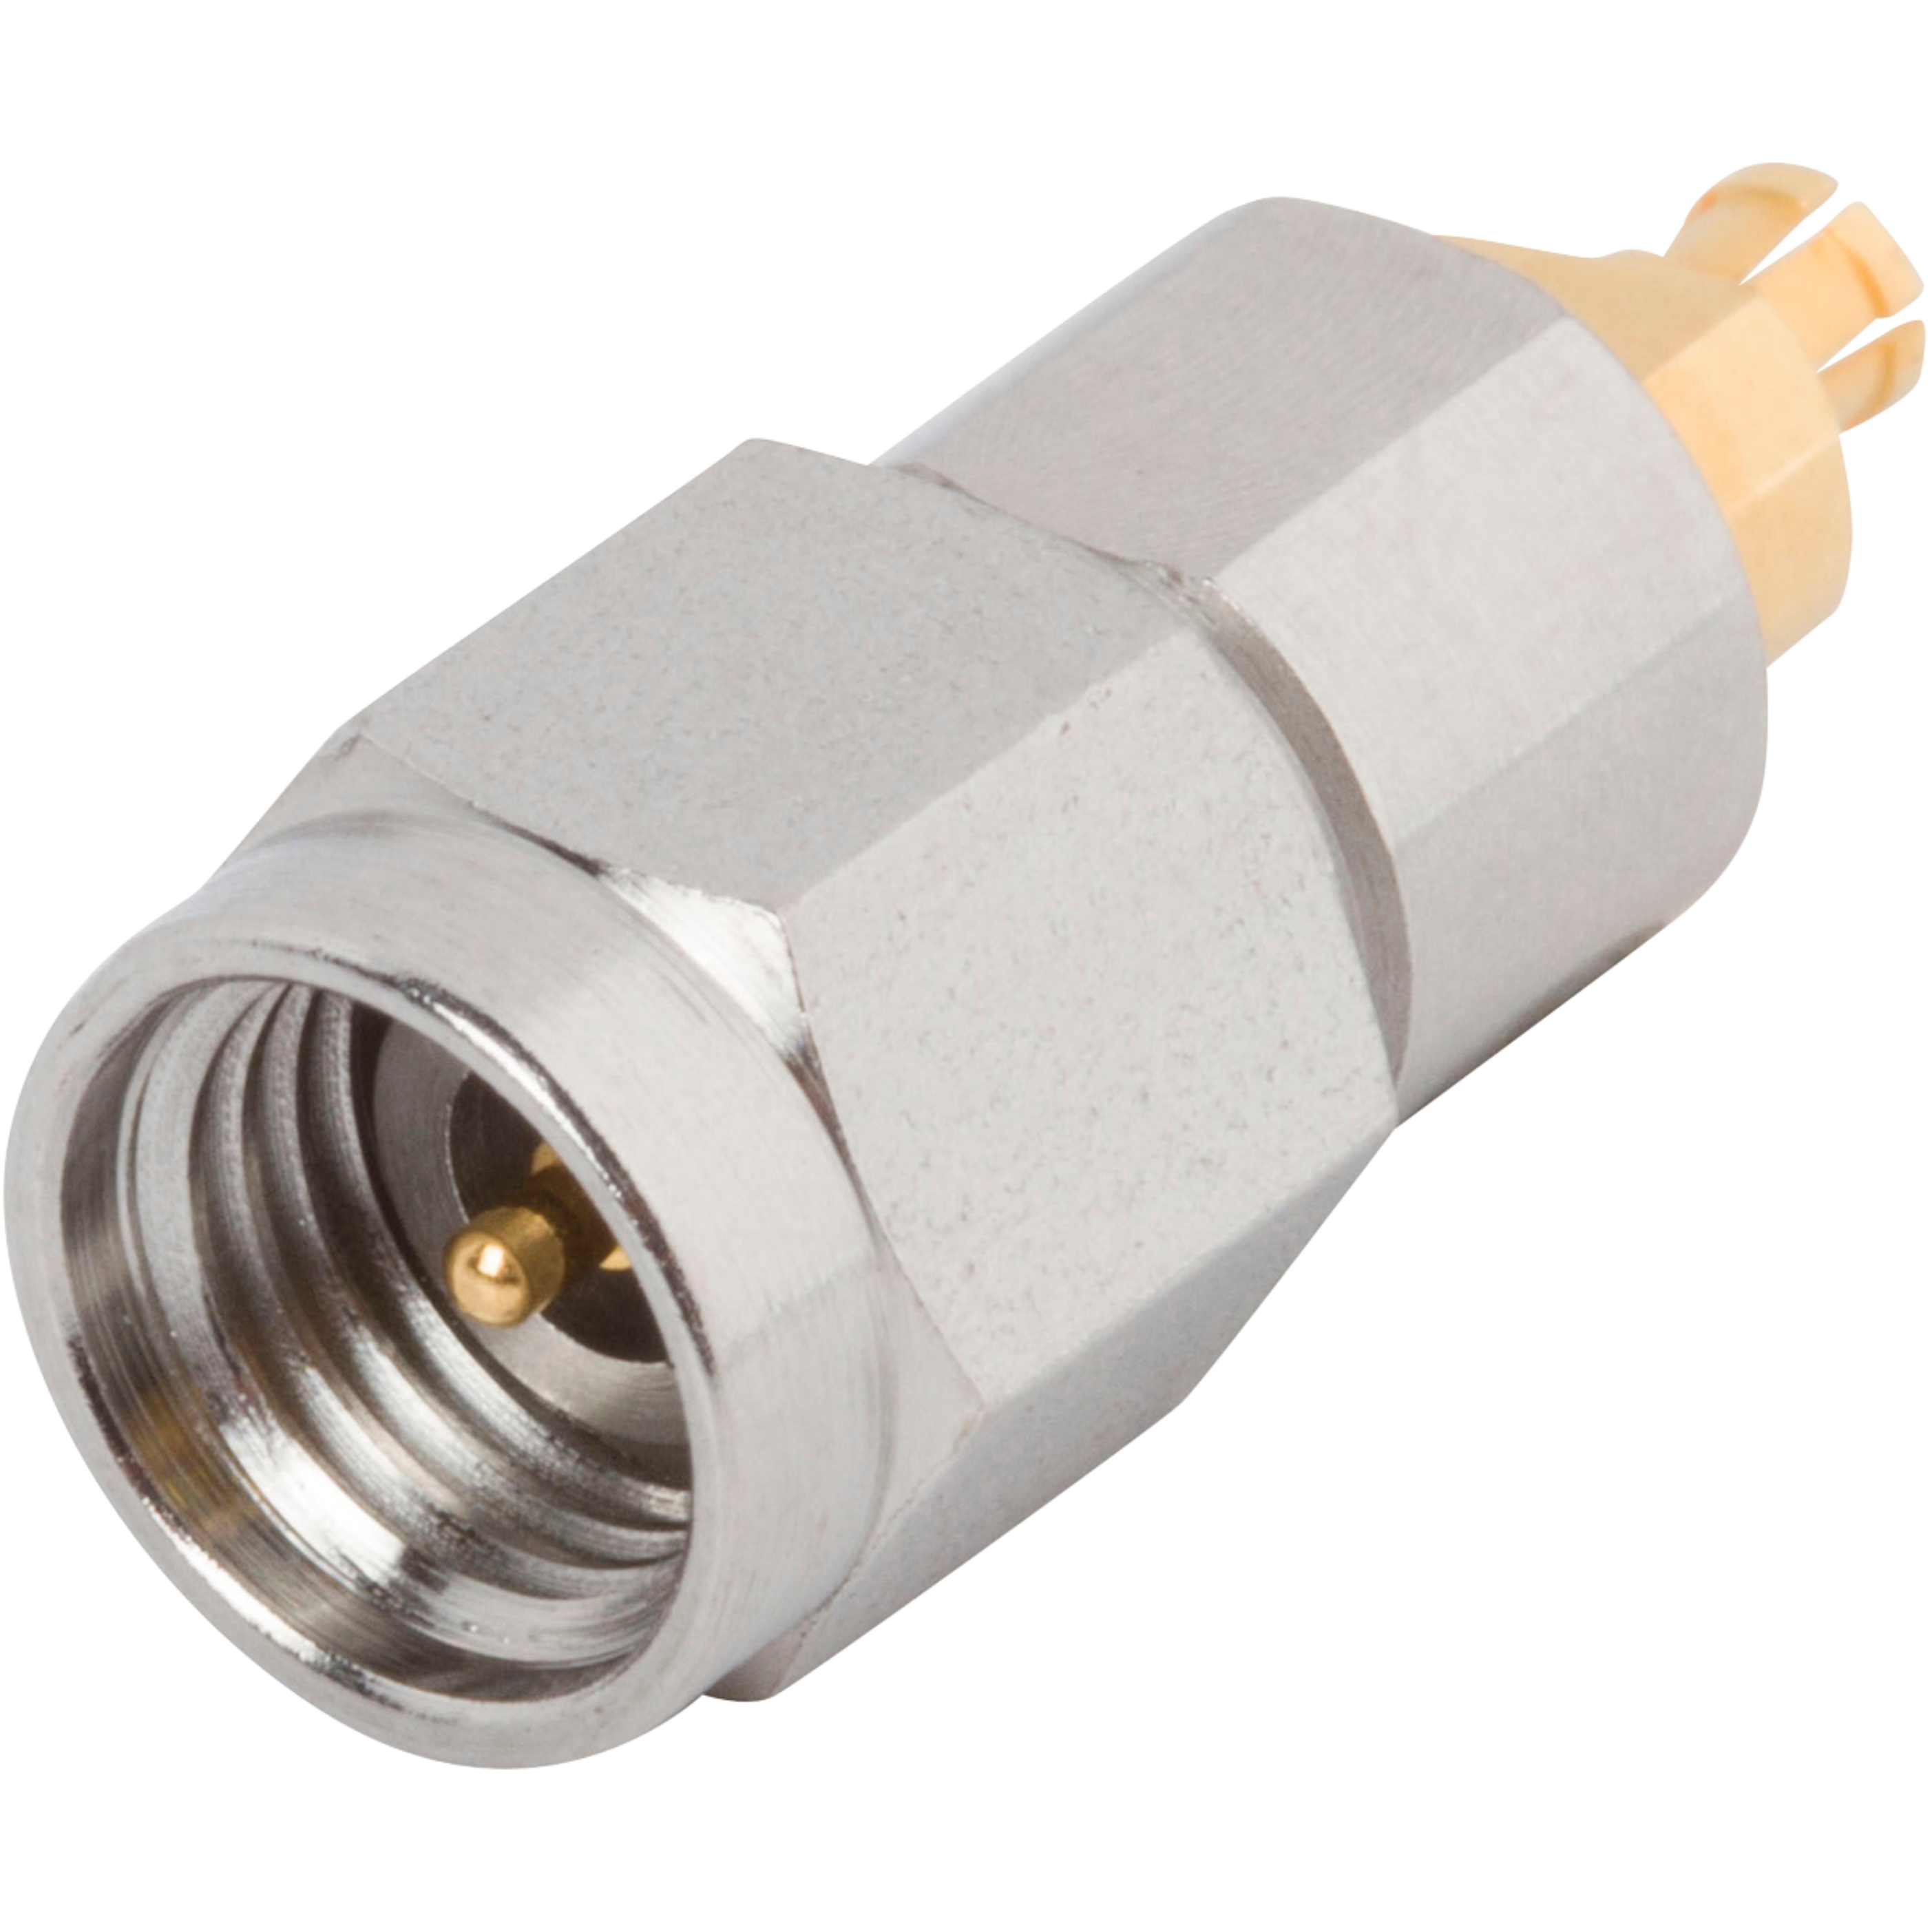 2.92mm Male to SMPM Female Adapter, SF1115-6085